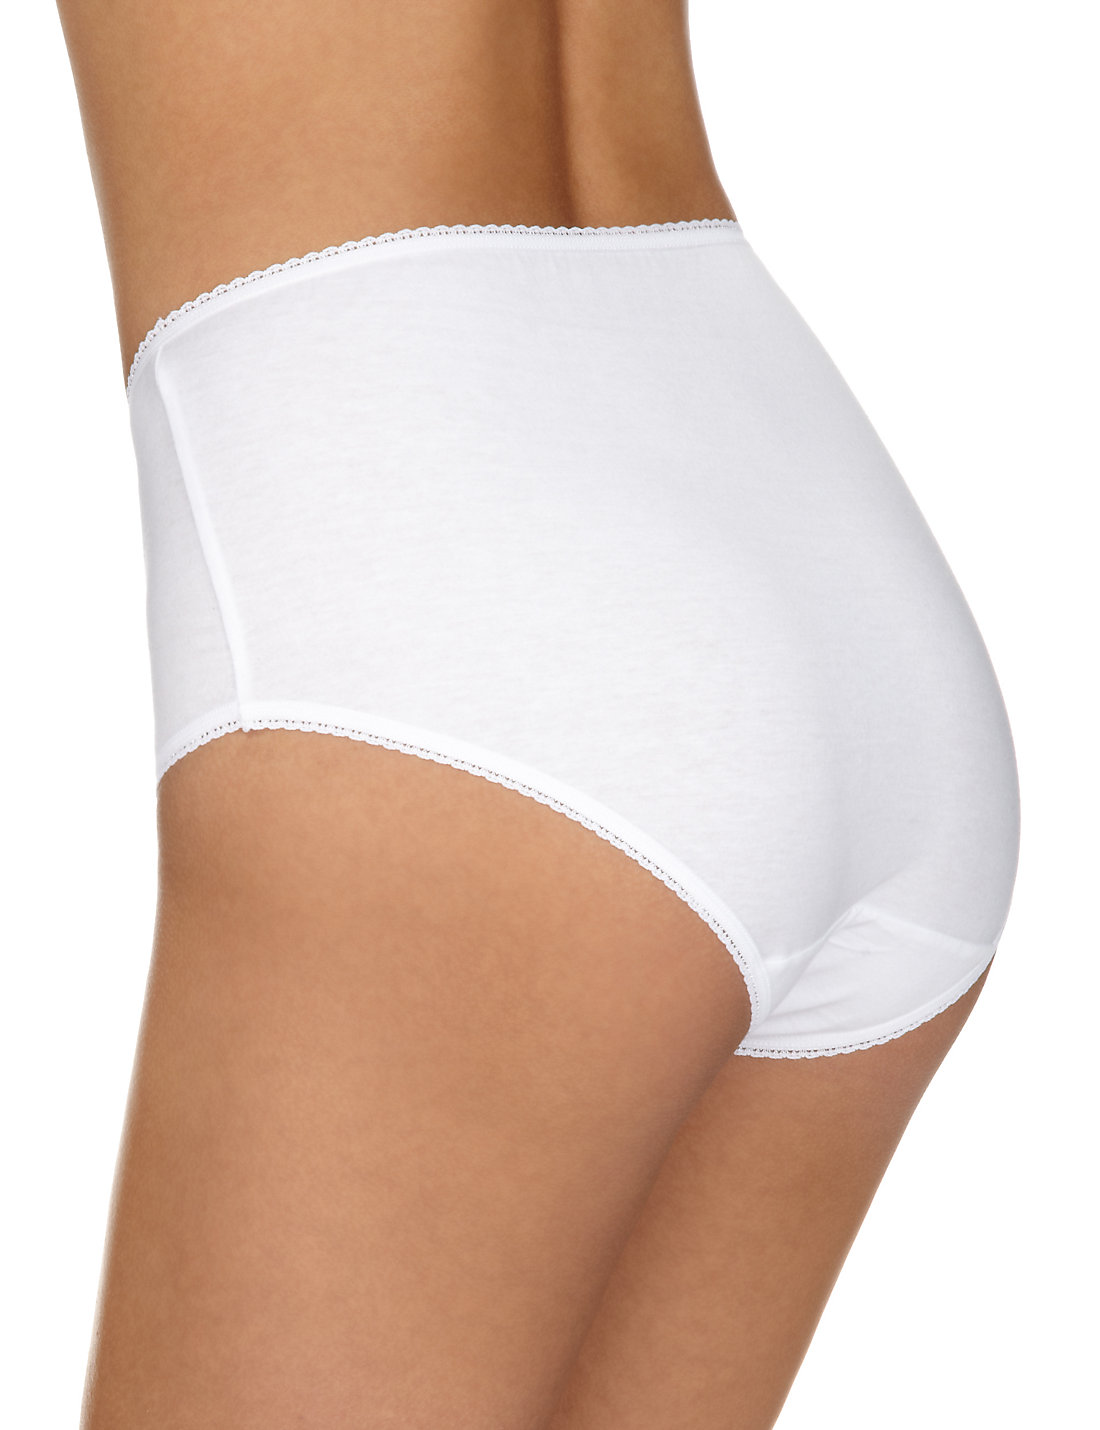 Marks and Spencer - - M&5 WHITE Pure Cotton High Rise Midi Knickers - Size 12 to 16